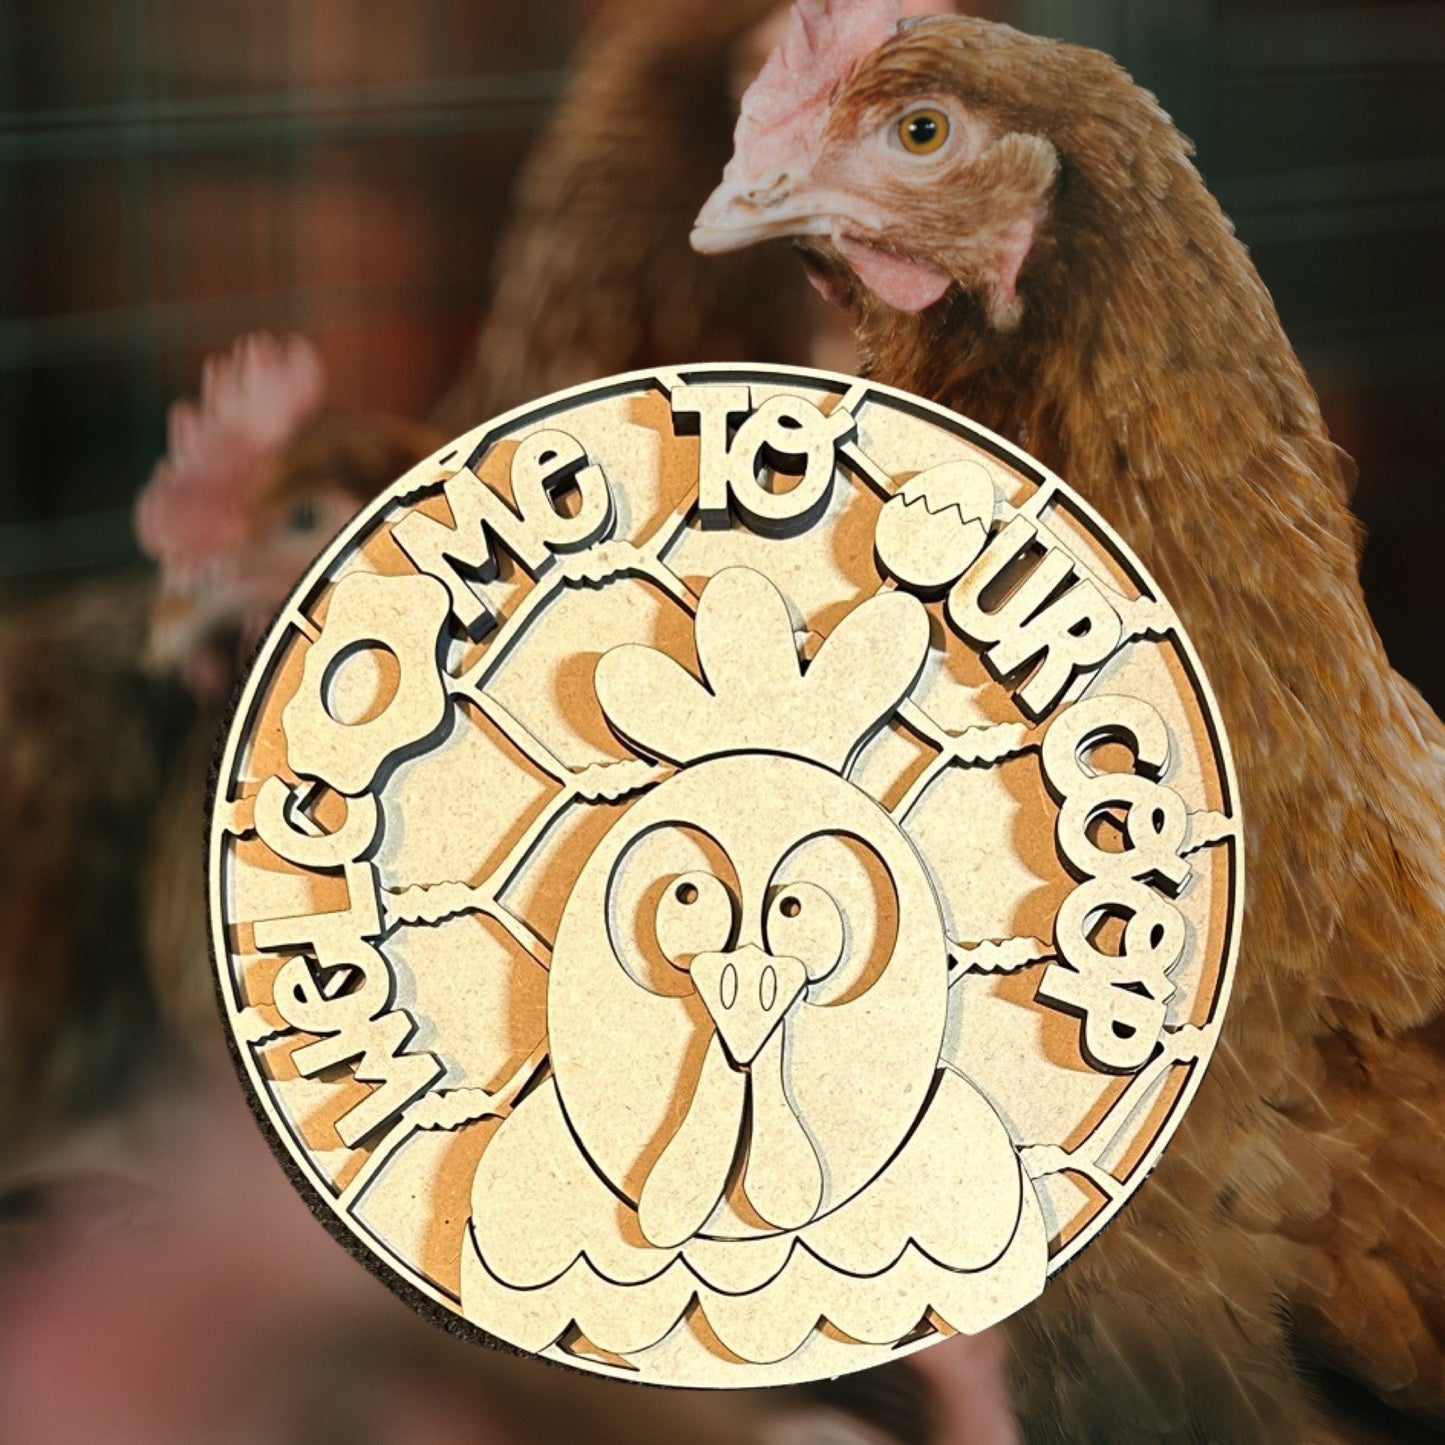 Welcome To Our Coop Chicken DIY Laser Cut Wood Sign Craft Paint Kit